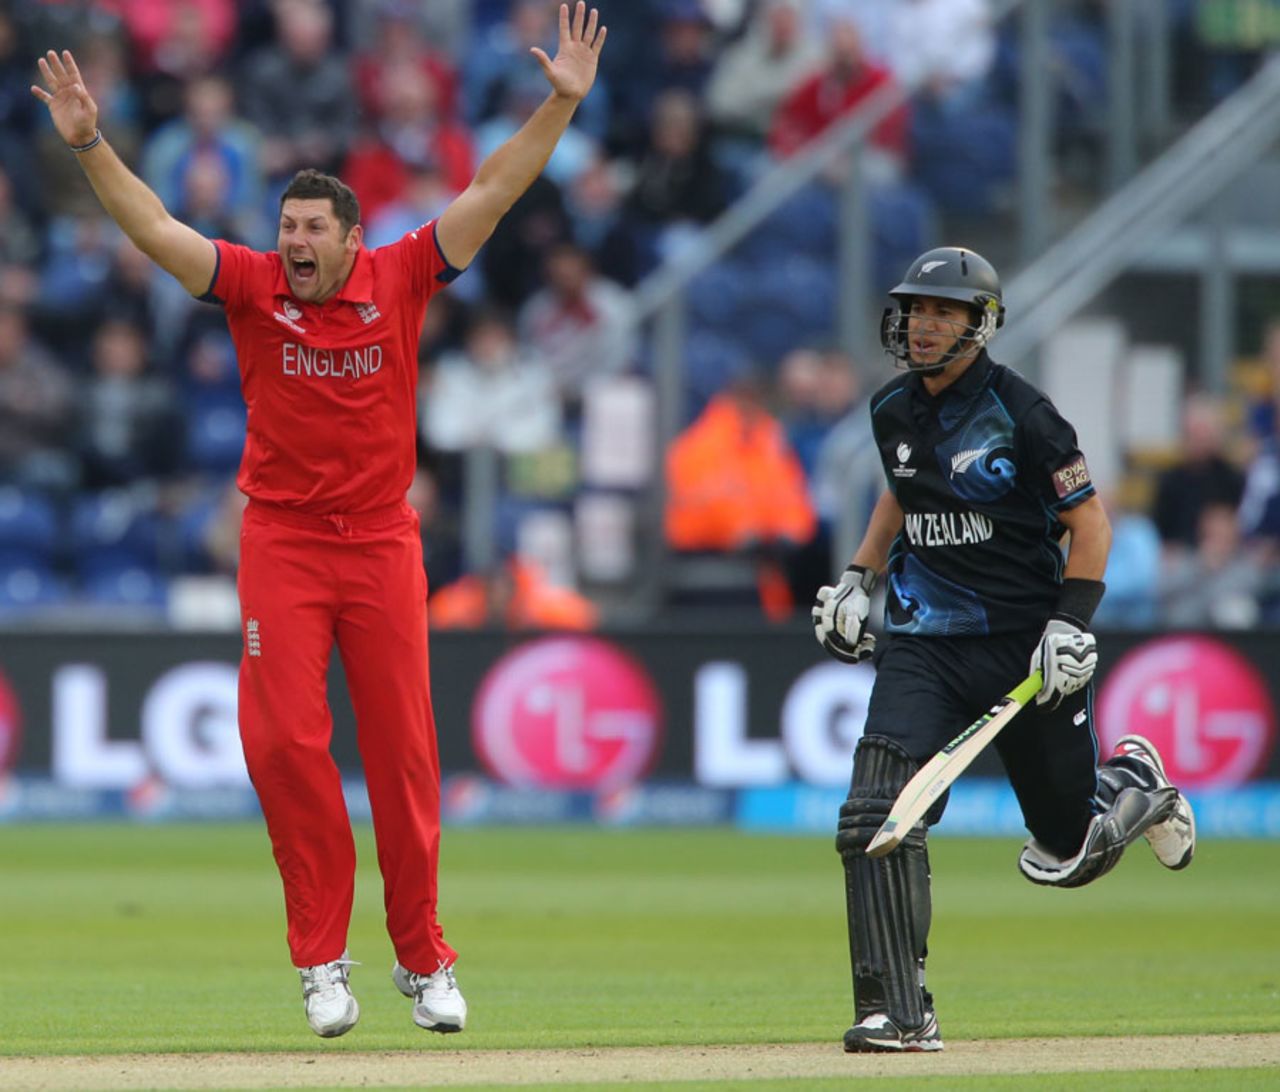 Tim Bresnan appeals for leg before, England v New Zealand, Champions Trophy, Group A, Cardiff, June 16, 2013